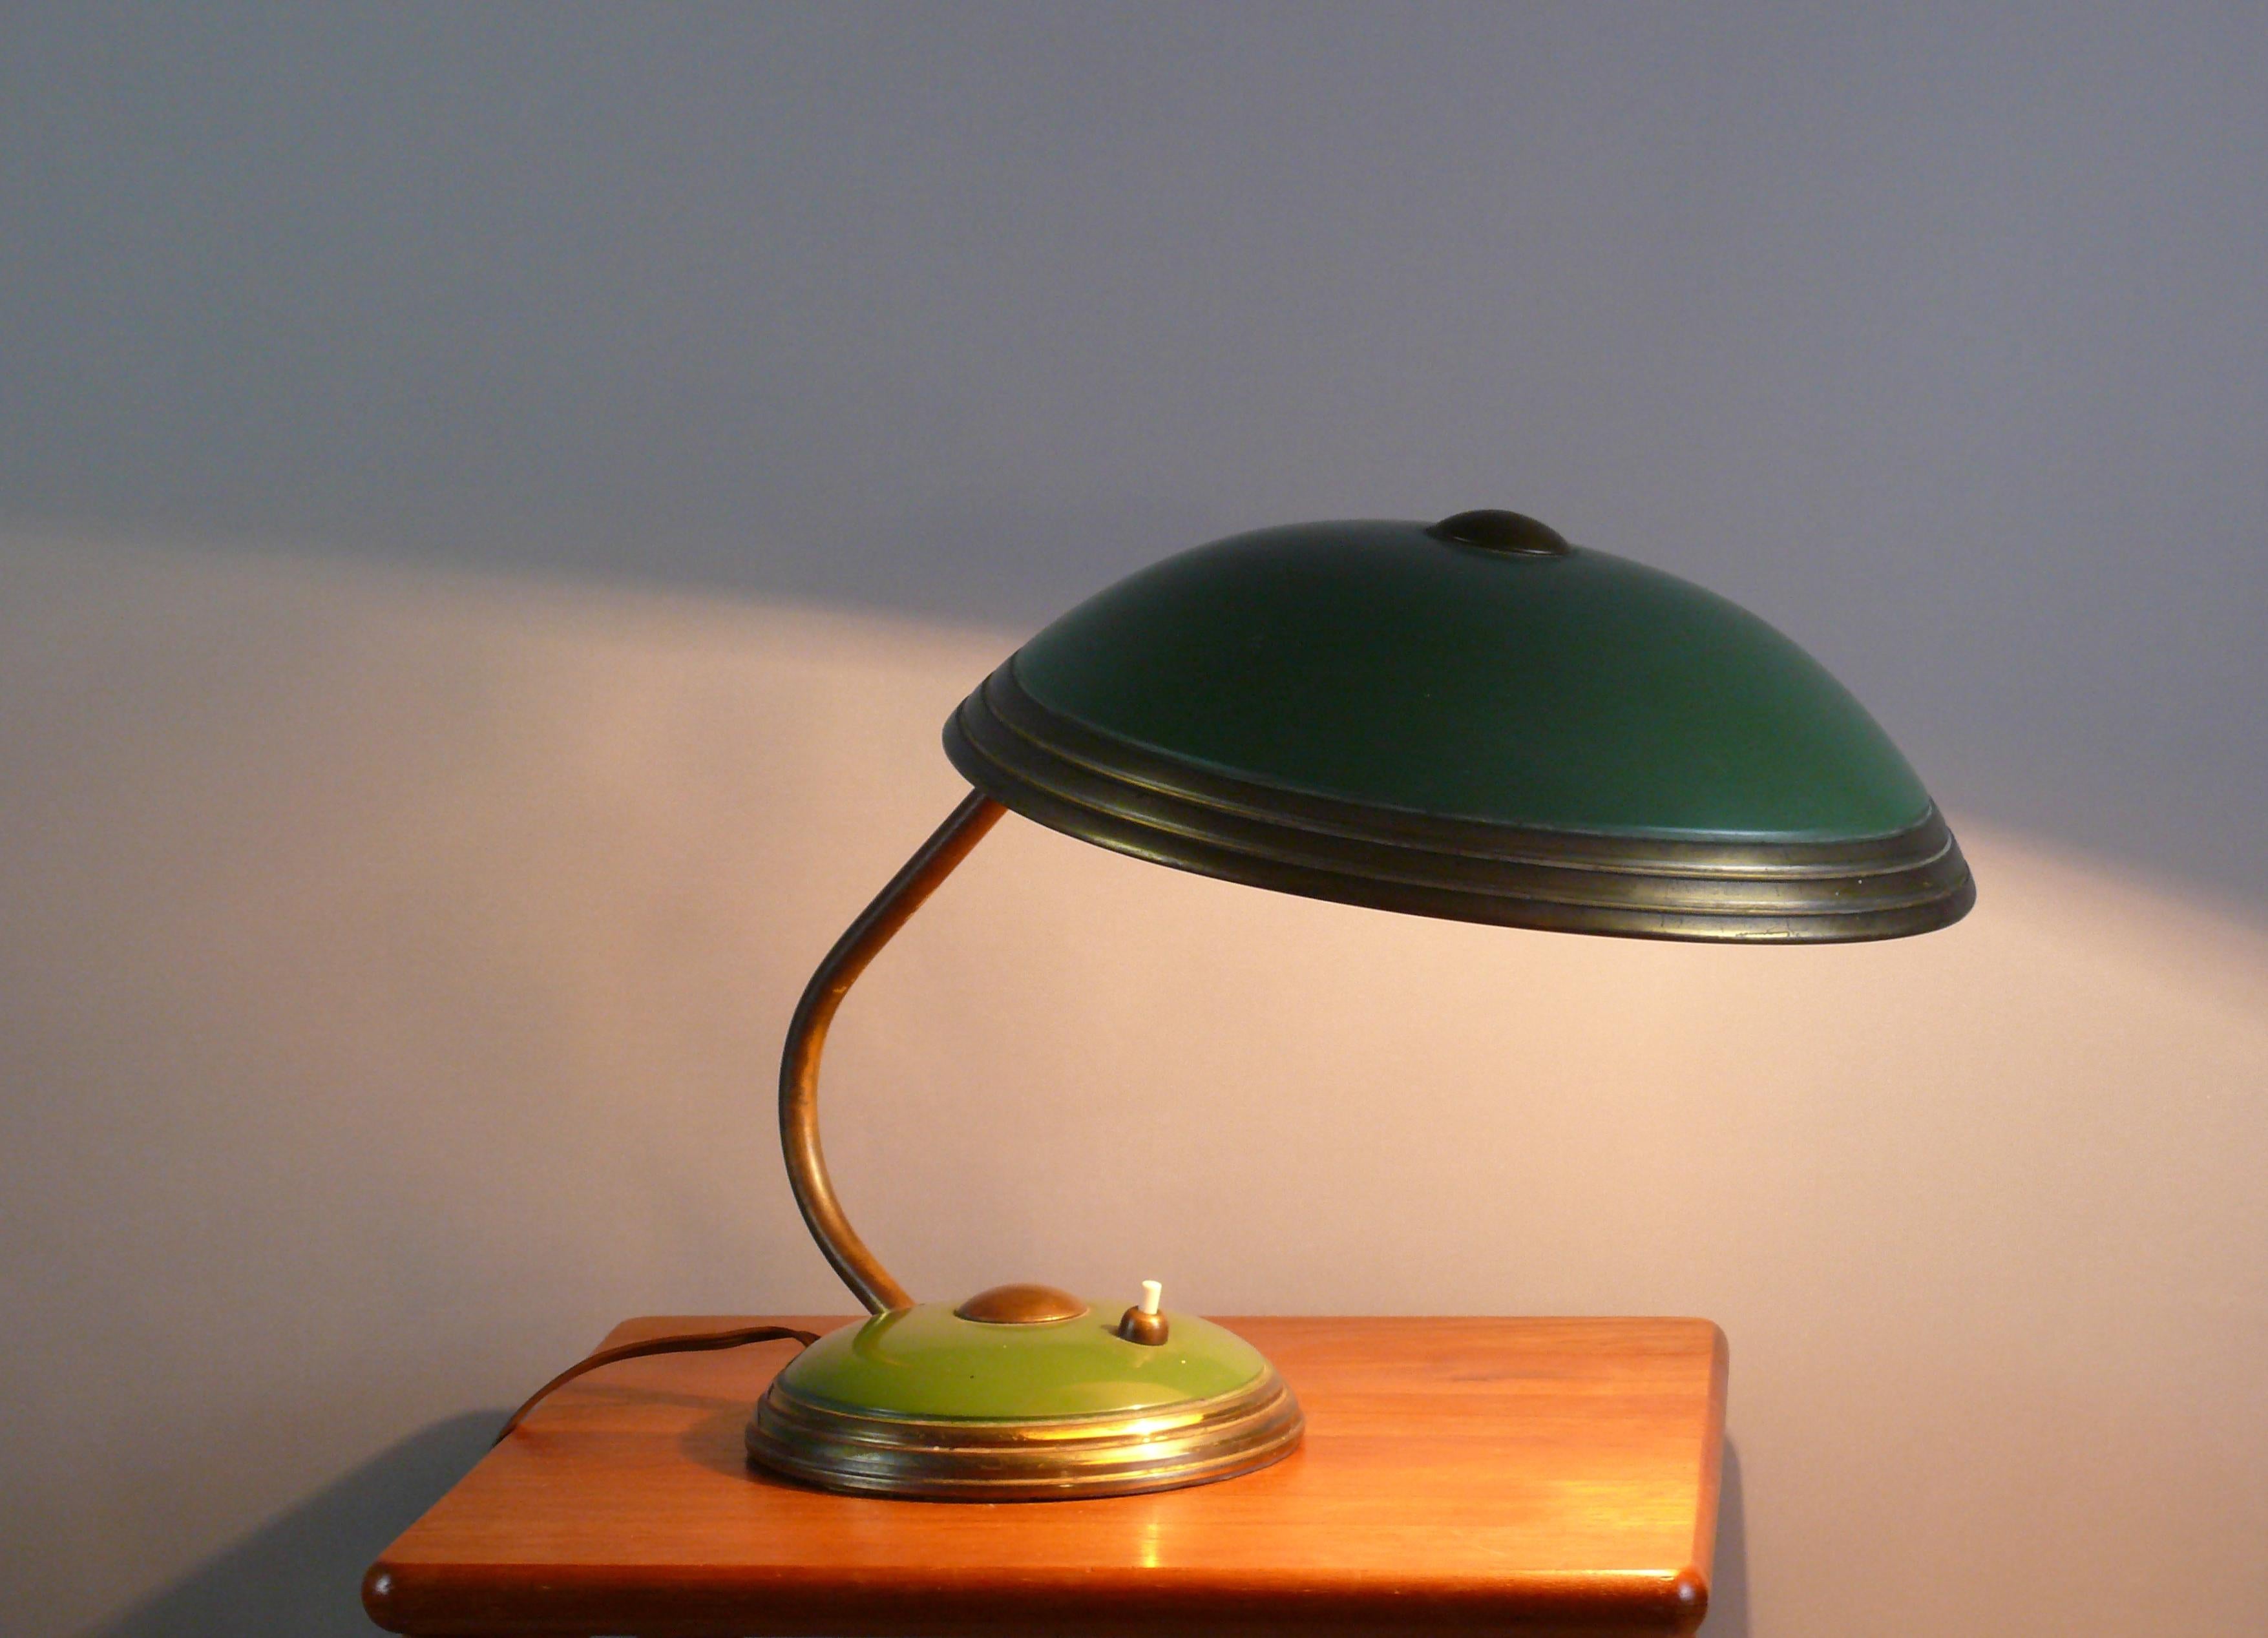 Helo table lamp in its original, unpolished condition, a timeless classic from the 1950s. Stylistically, the design of the lamp is based on the Bauhaus period. The lampshade can be adjusted in many ways using a ball joint. The solid lamp is made